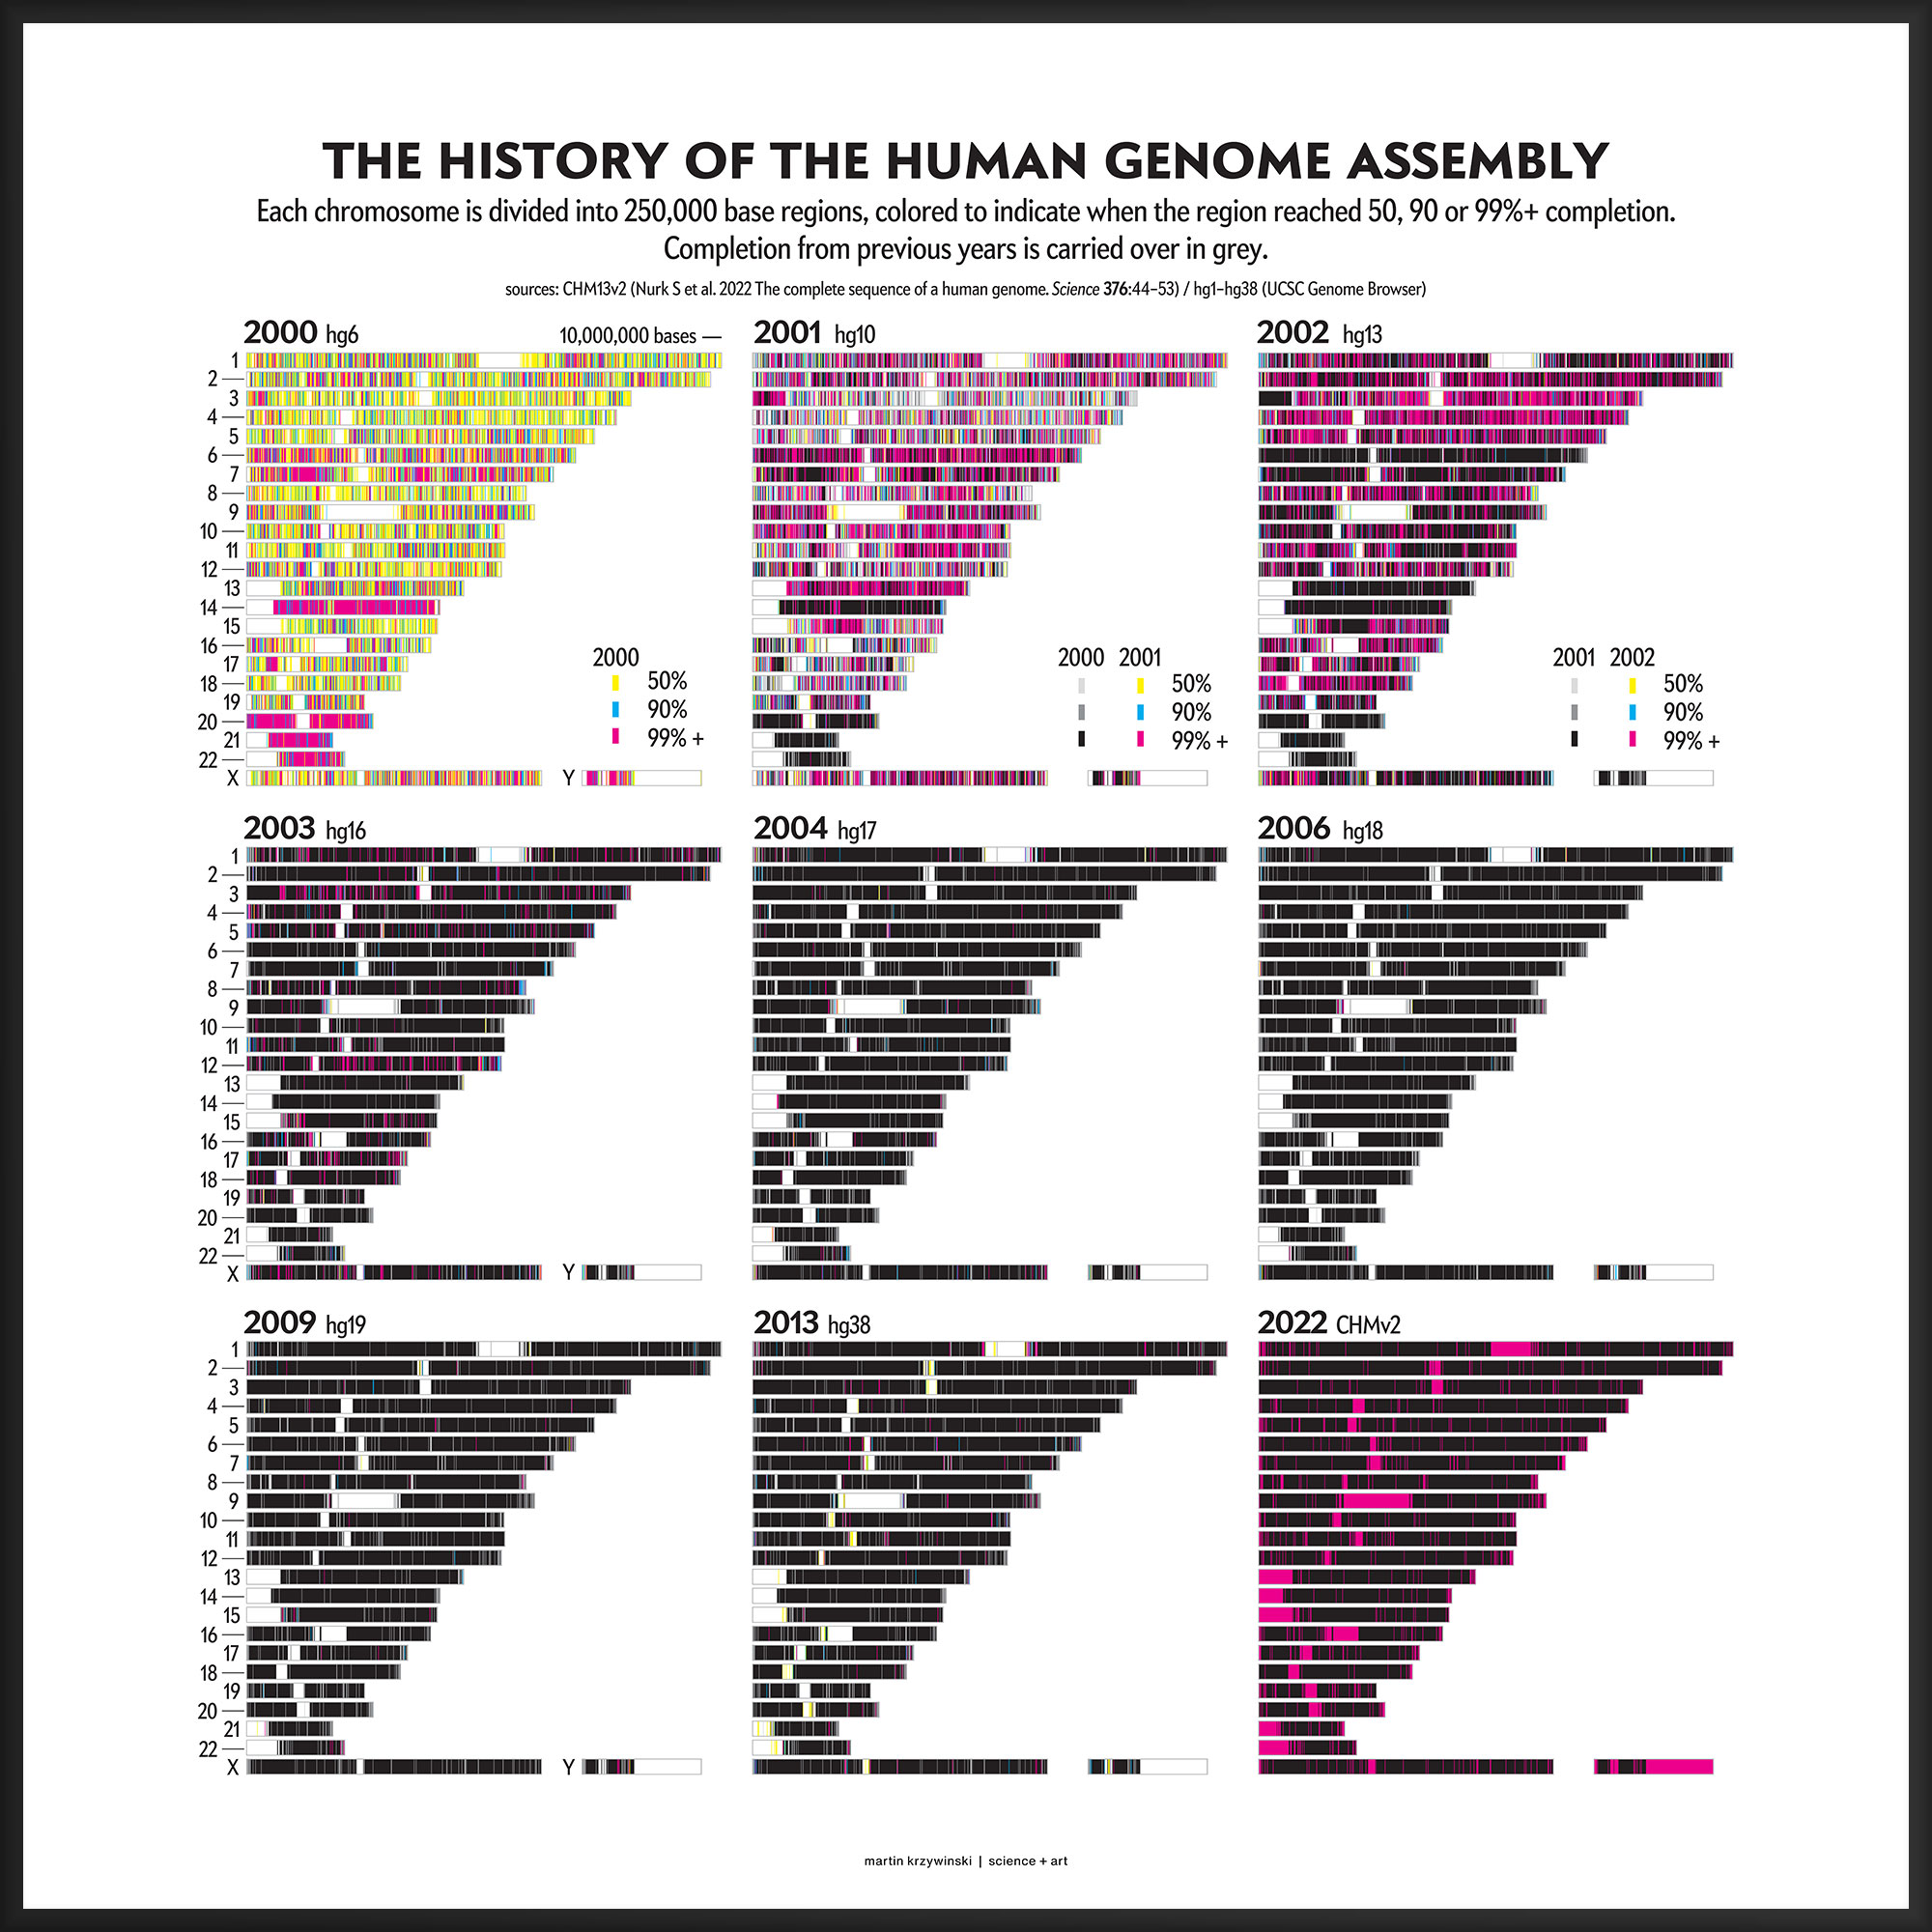 Year-by-year history of the human genome assembly (250kb bins) by Martin Krzywinski